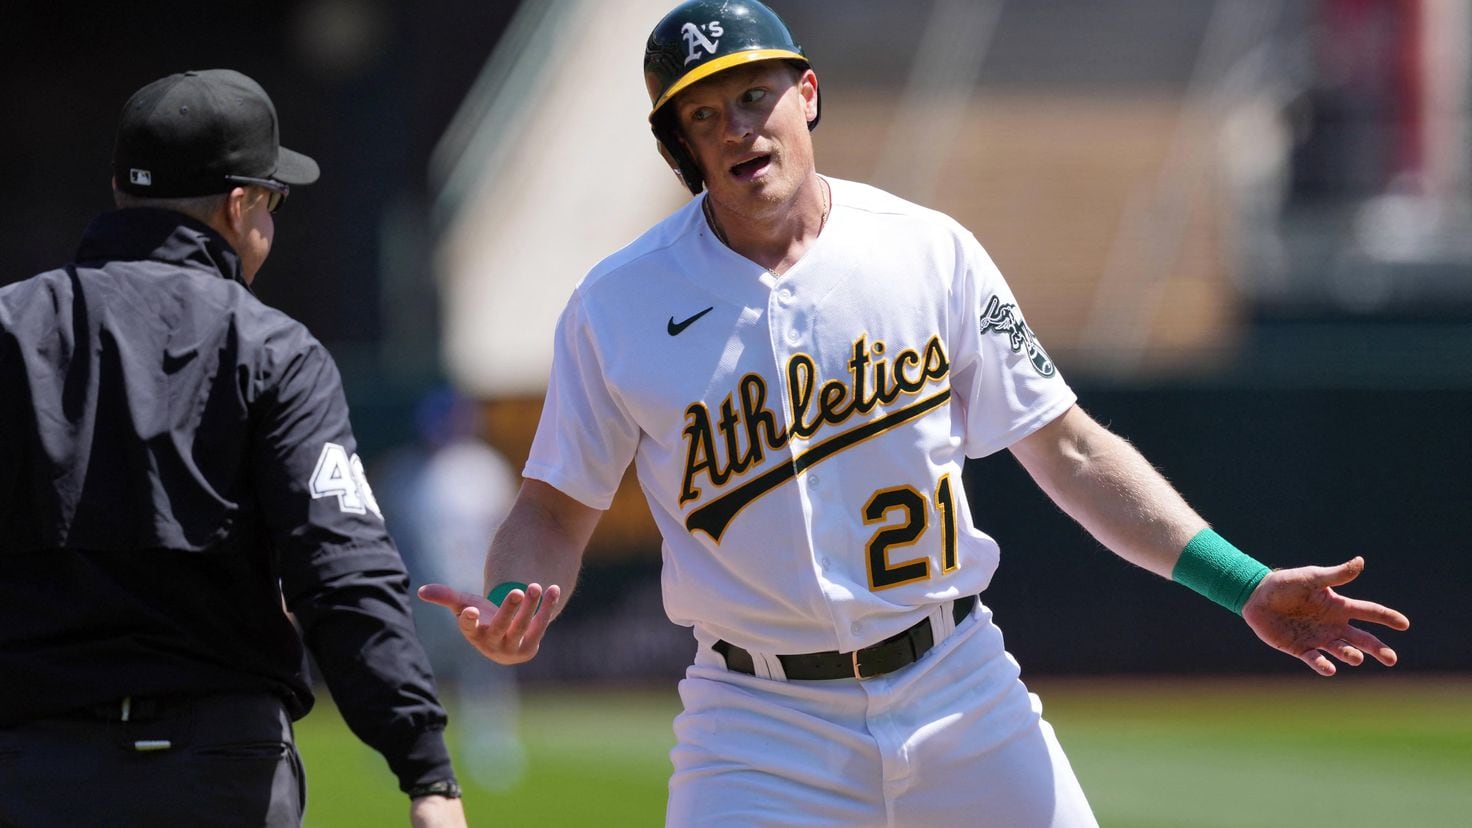 Oakland Athletics: Which players have the best Players' Weekend jerseys?